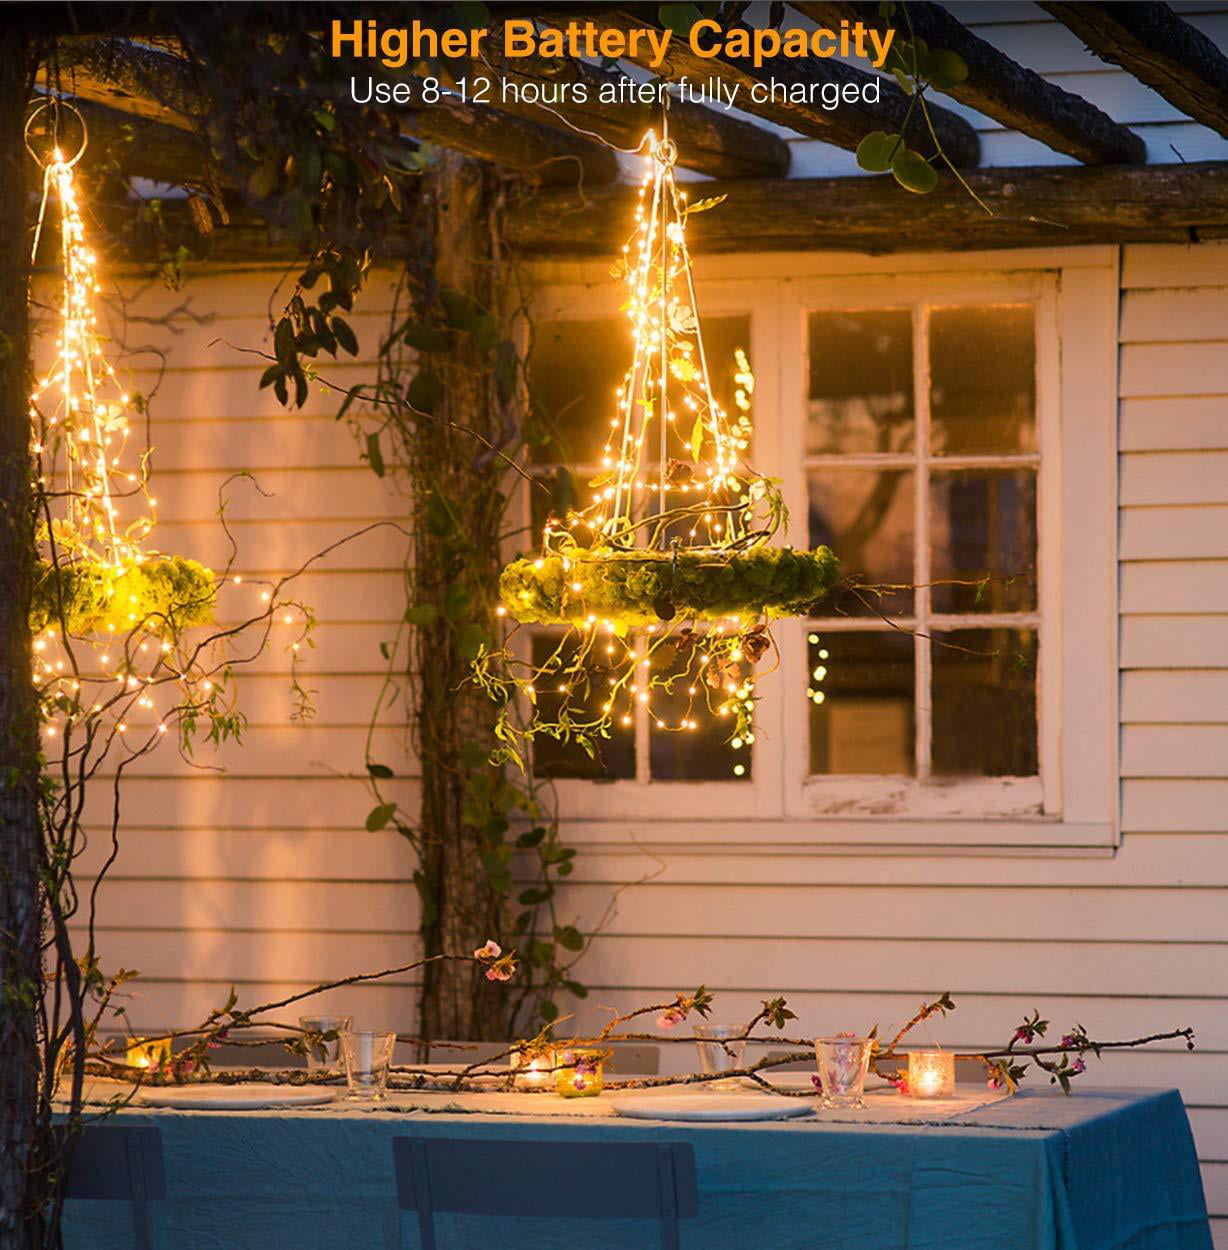 Garden 78.7FT 240LED Solar Fairy Lights 8 Modes Copper Wire Solar Powered Fairy Lights Outdoor Waterproof for Christmas kolpop Solar String Lights Warm White Patio Camping Tree Yard Party